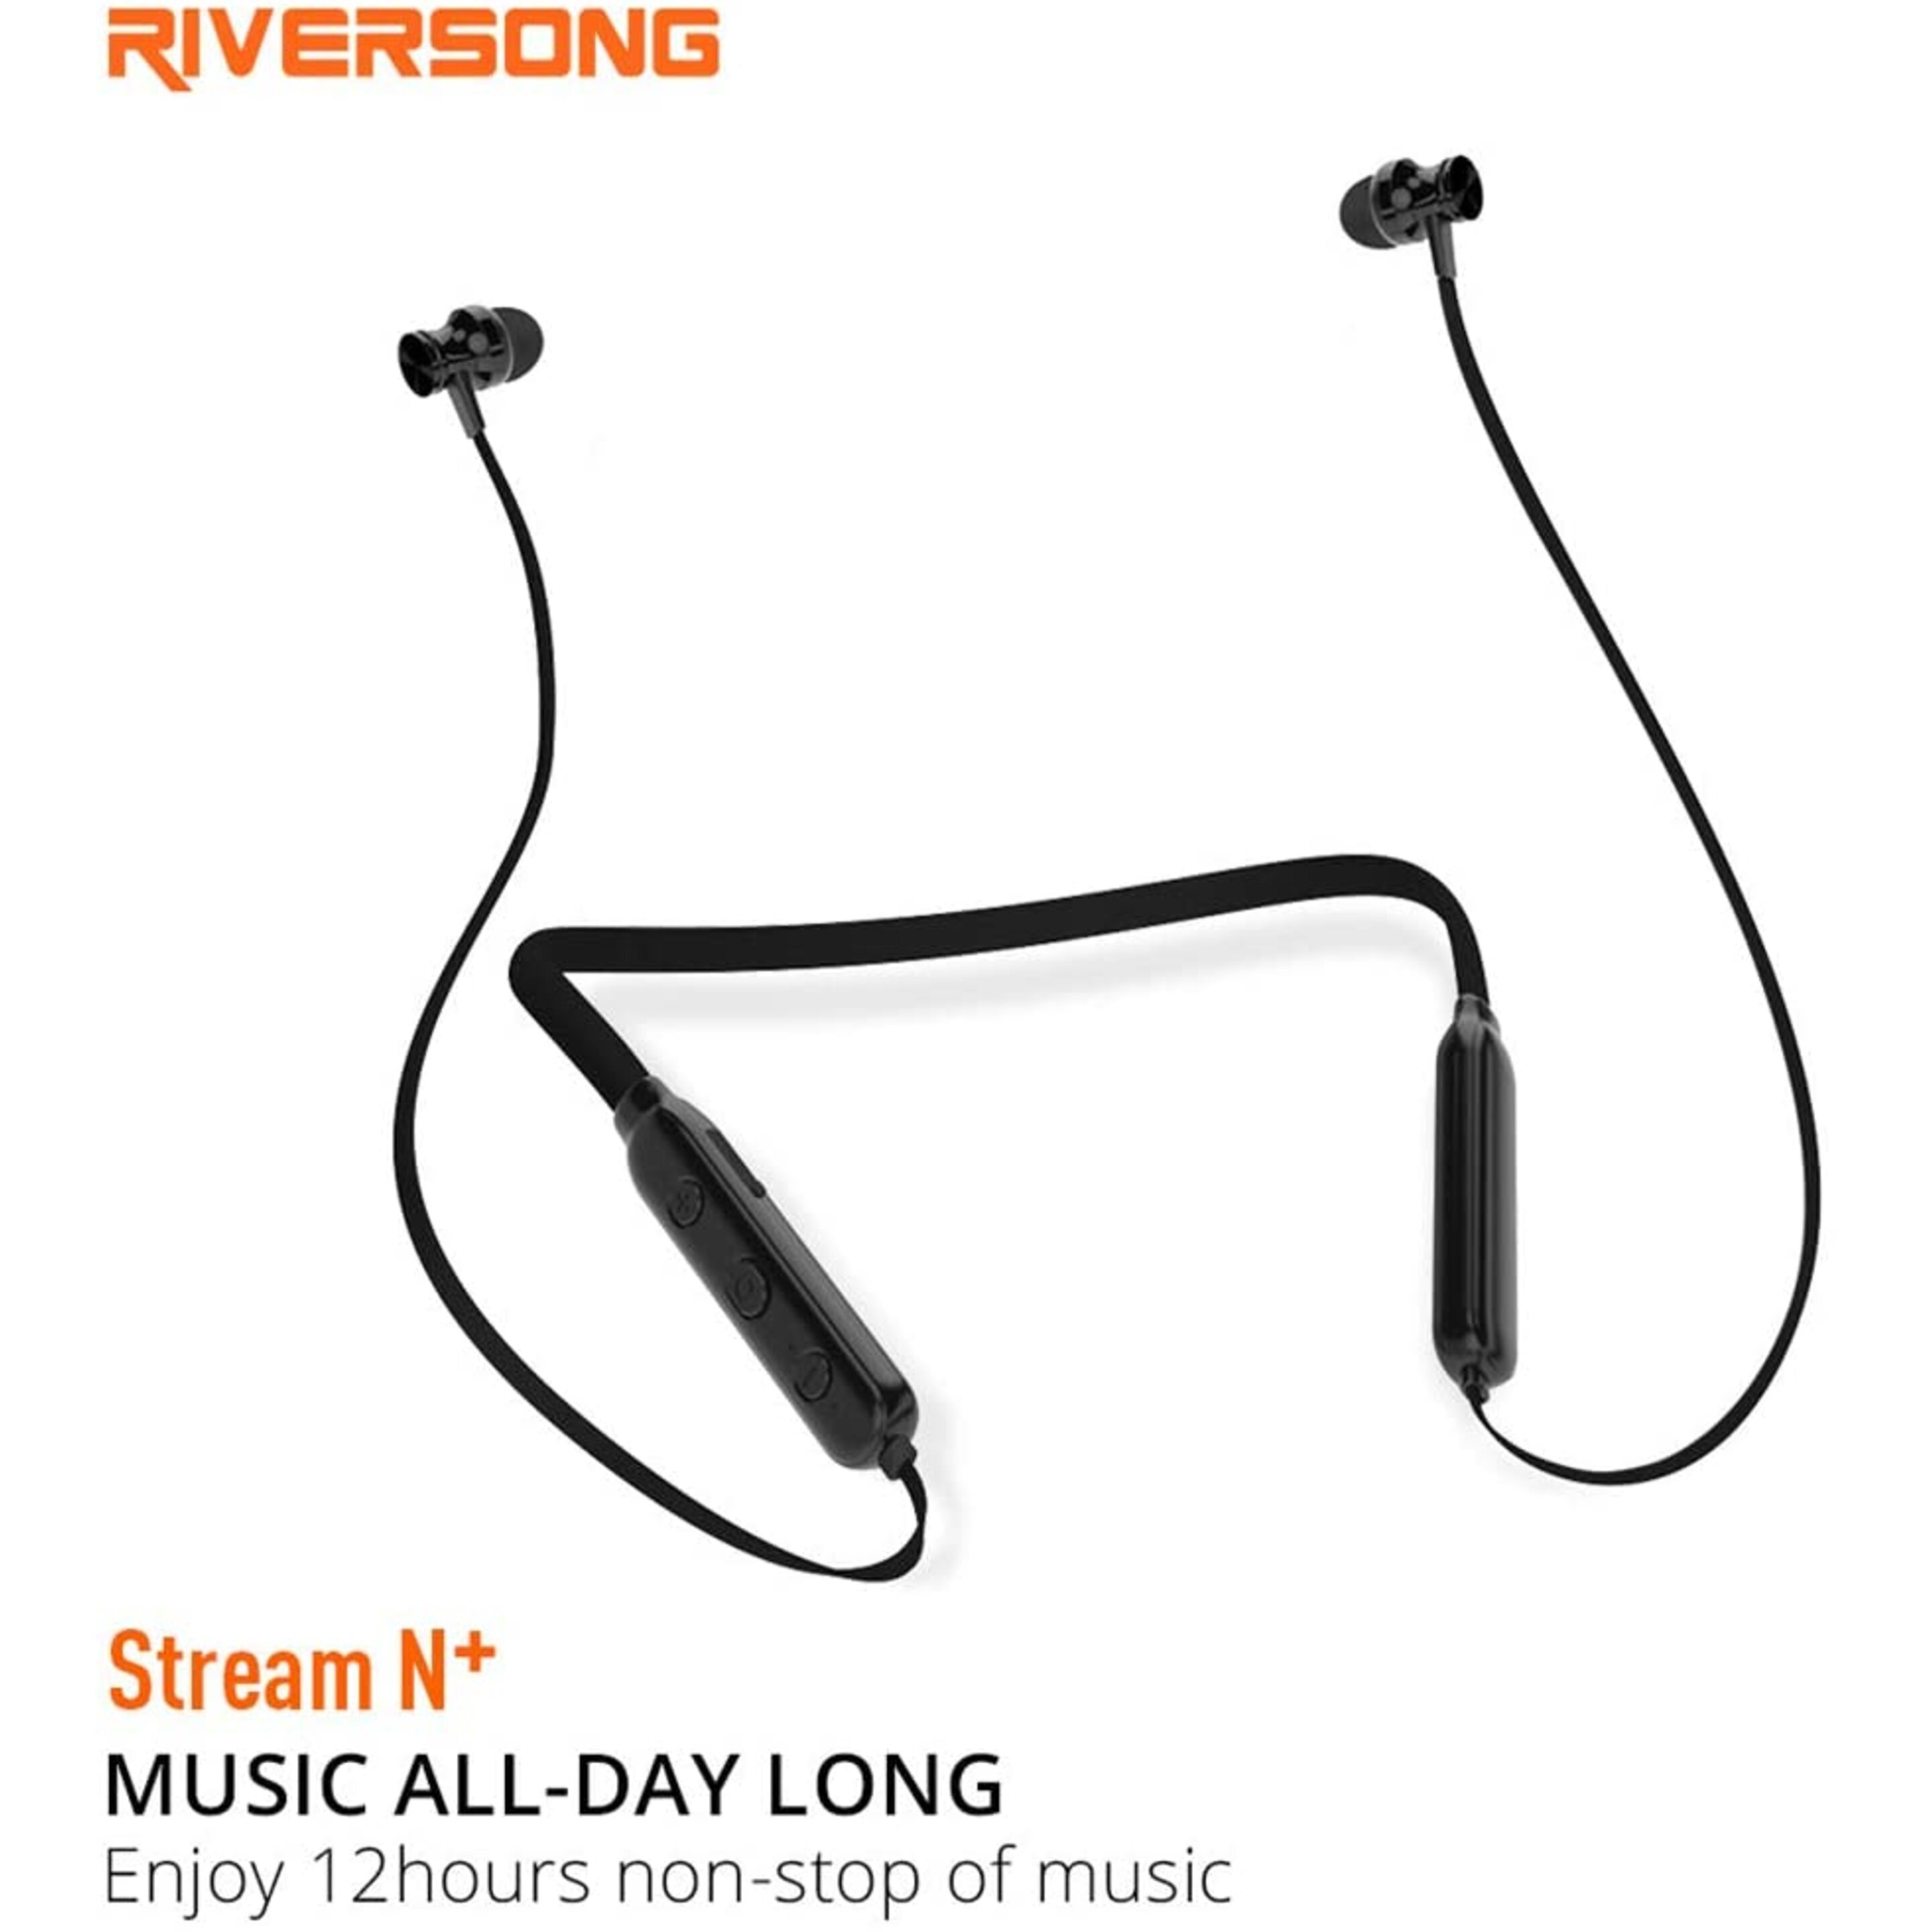 Riversong Stream N+ Auriculares Inalámbricos